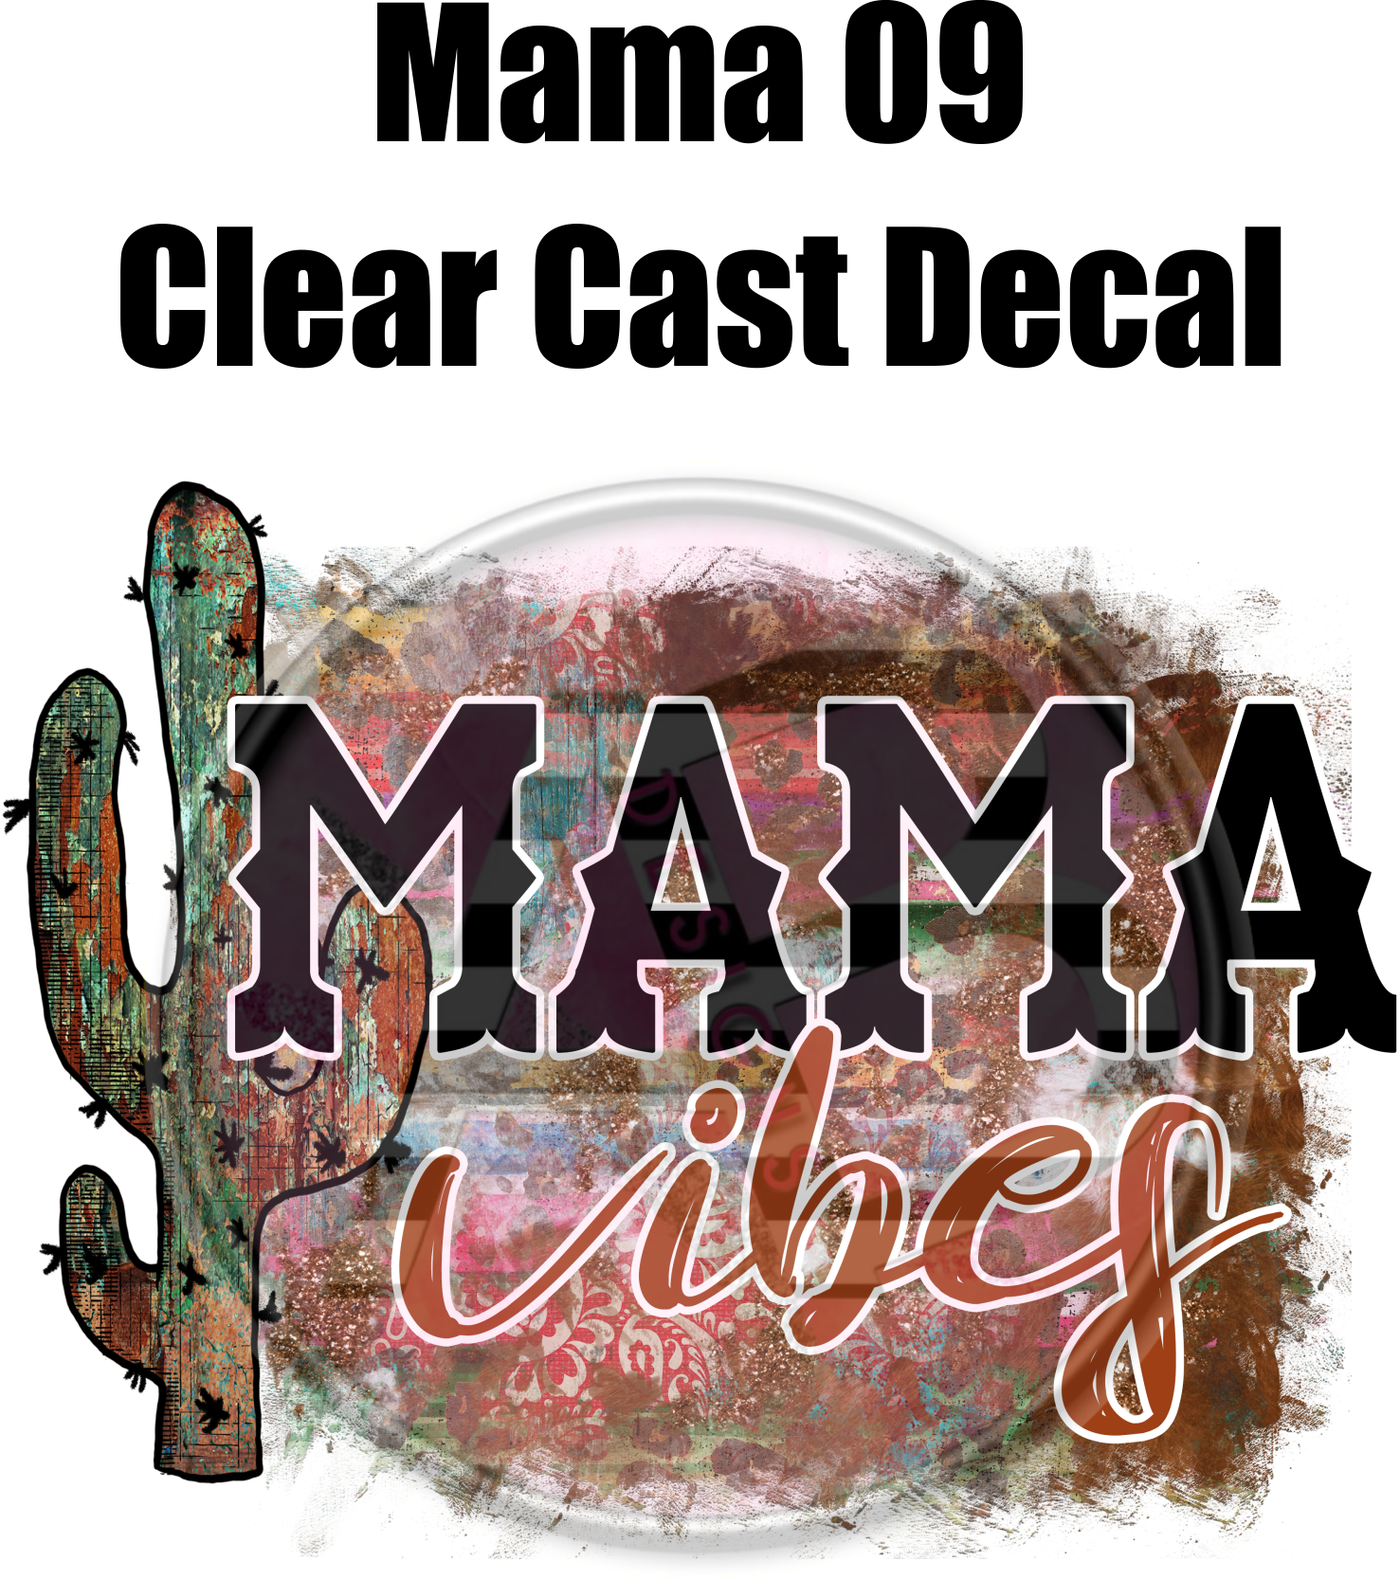 Mama 09 - Clear Cast Decal - 70